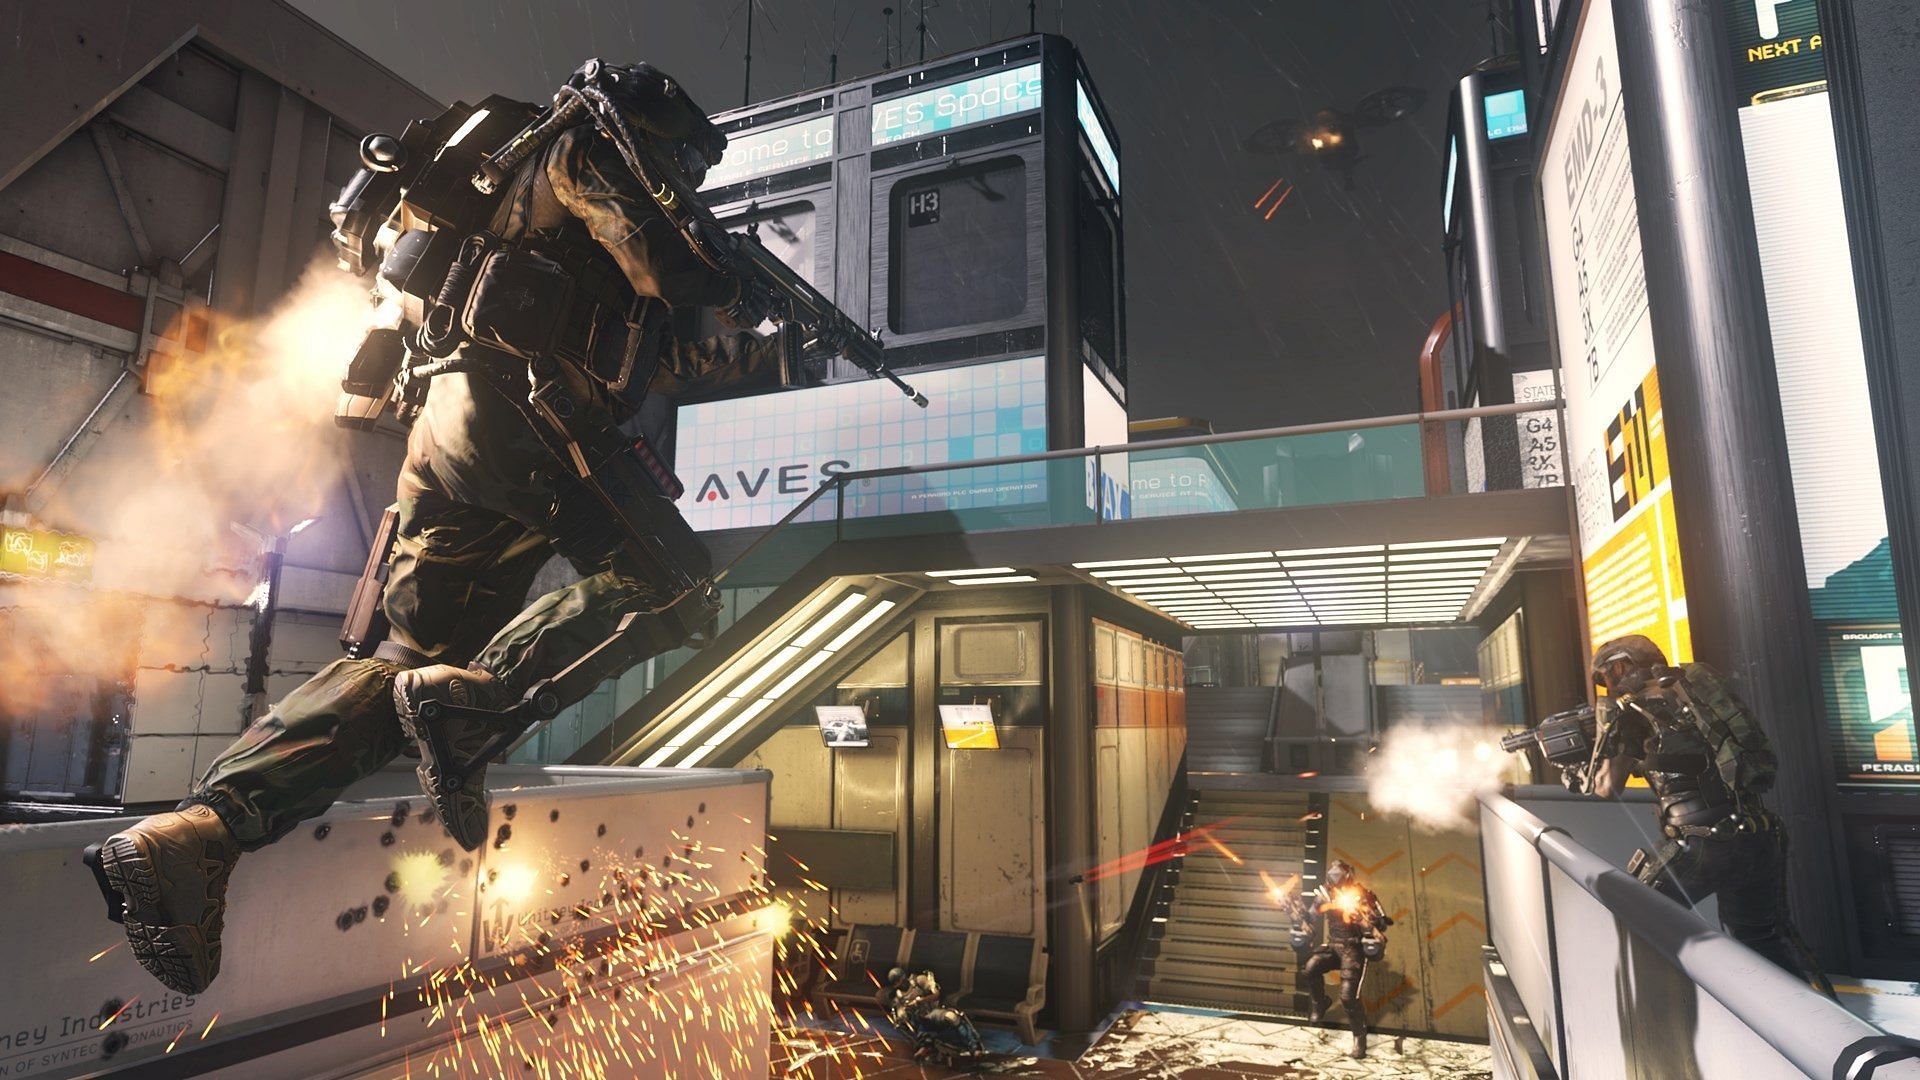 An Operator using jetpack in Advanced Warfare to fight